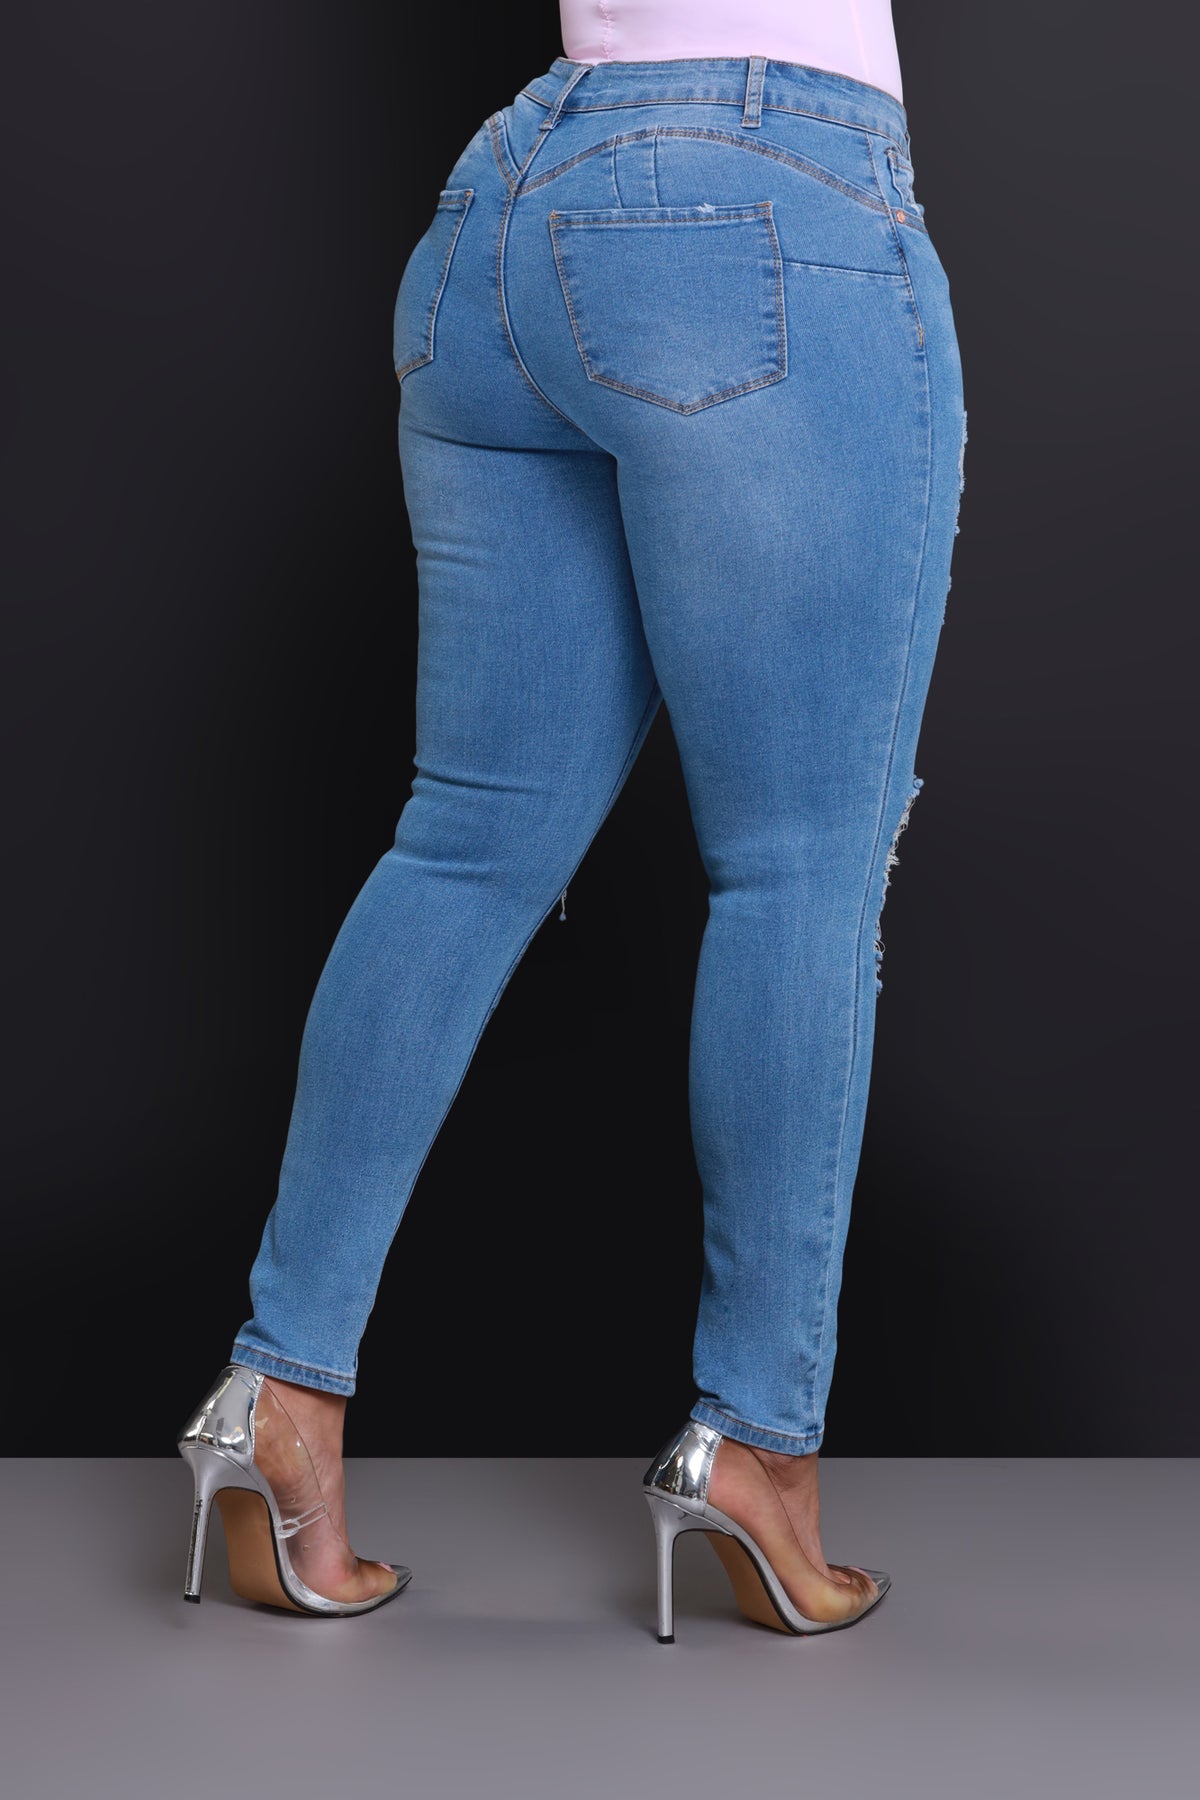 
              Heads Or Tails Hourglass Distressed Stretchy Jeans - Medium Wash - Swank A Posh
            